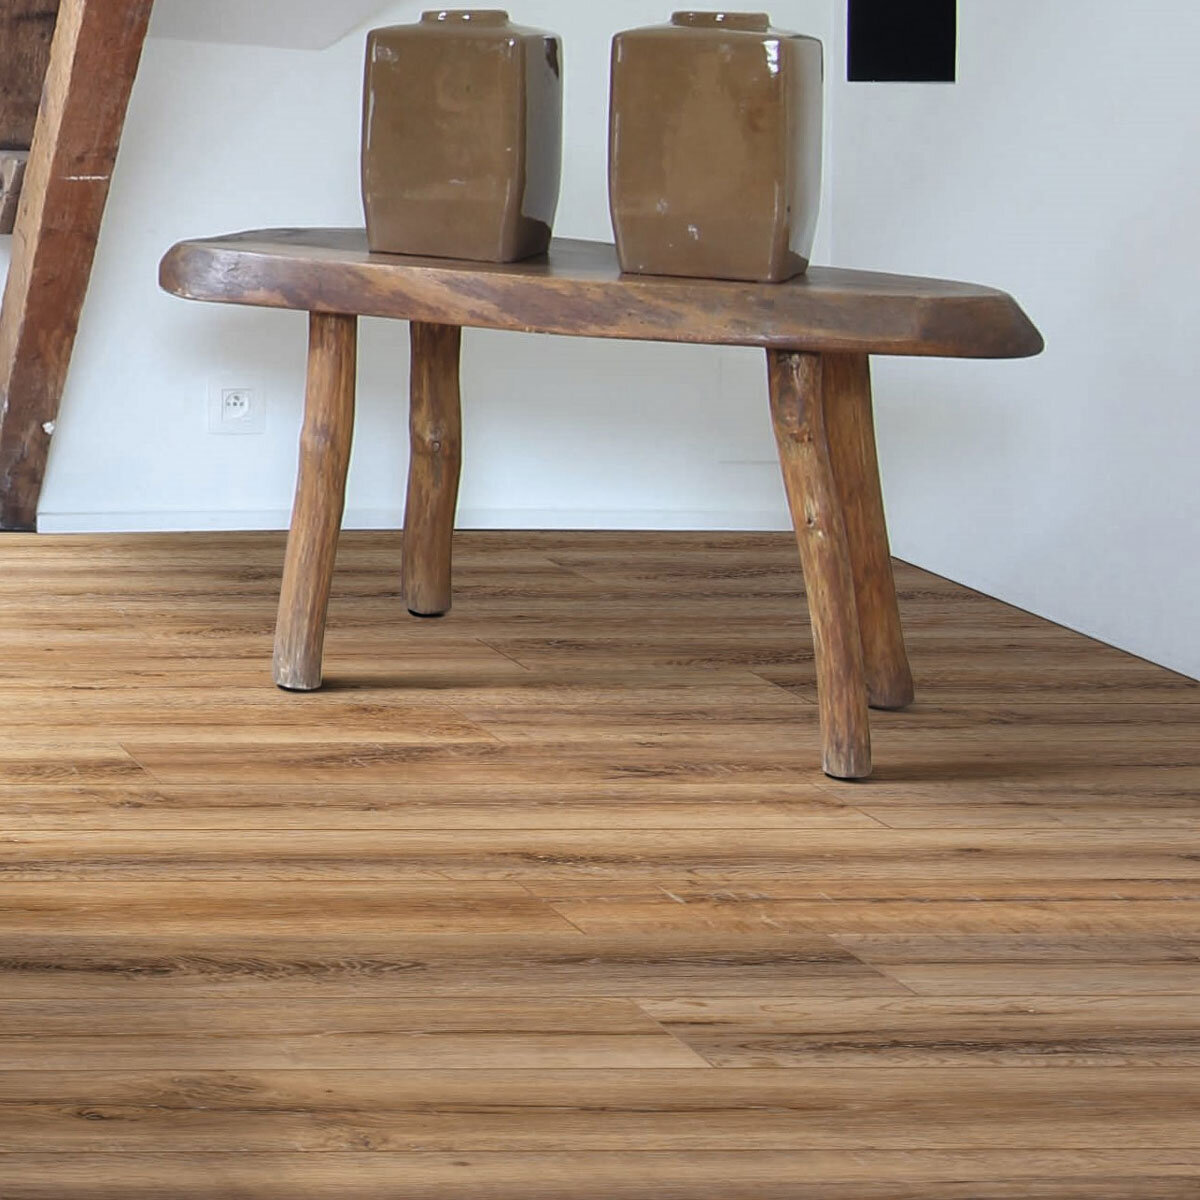 Lifestyle image of flooring with bench